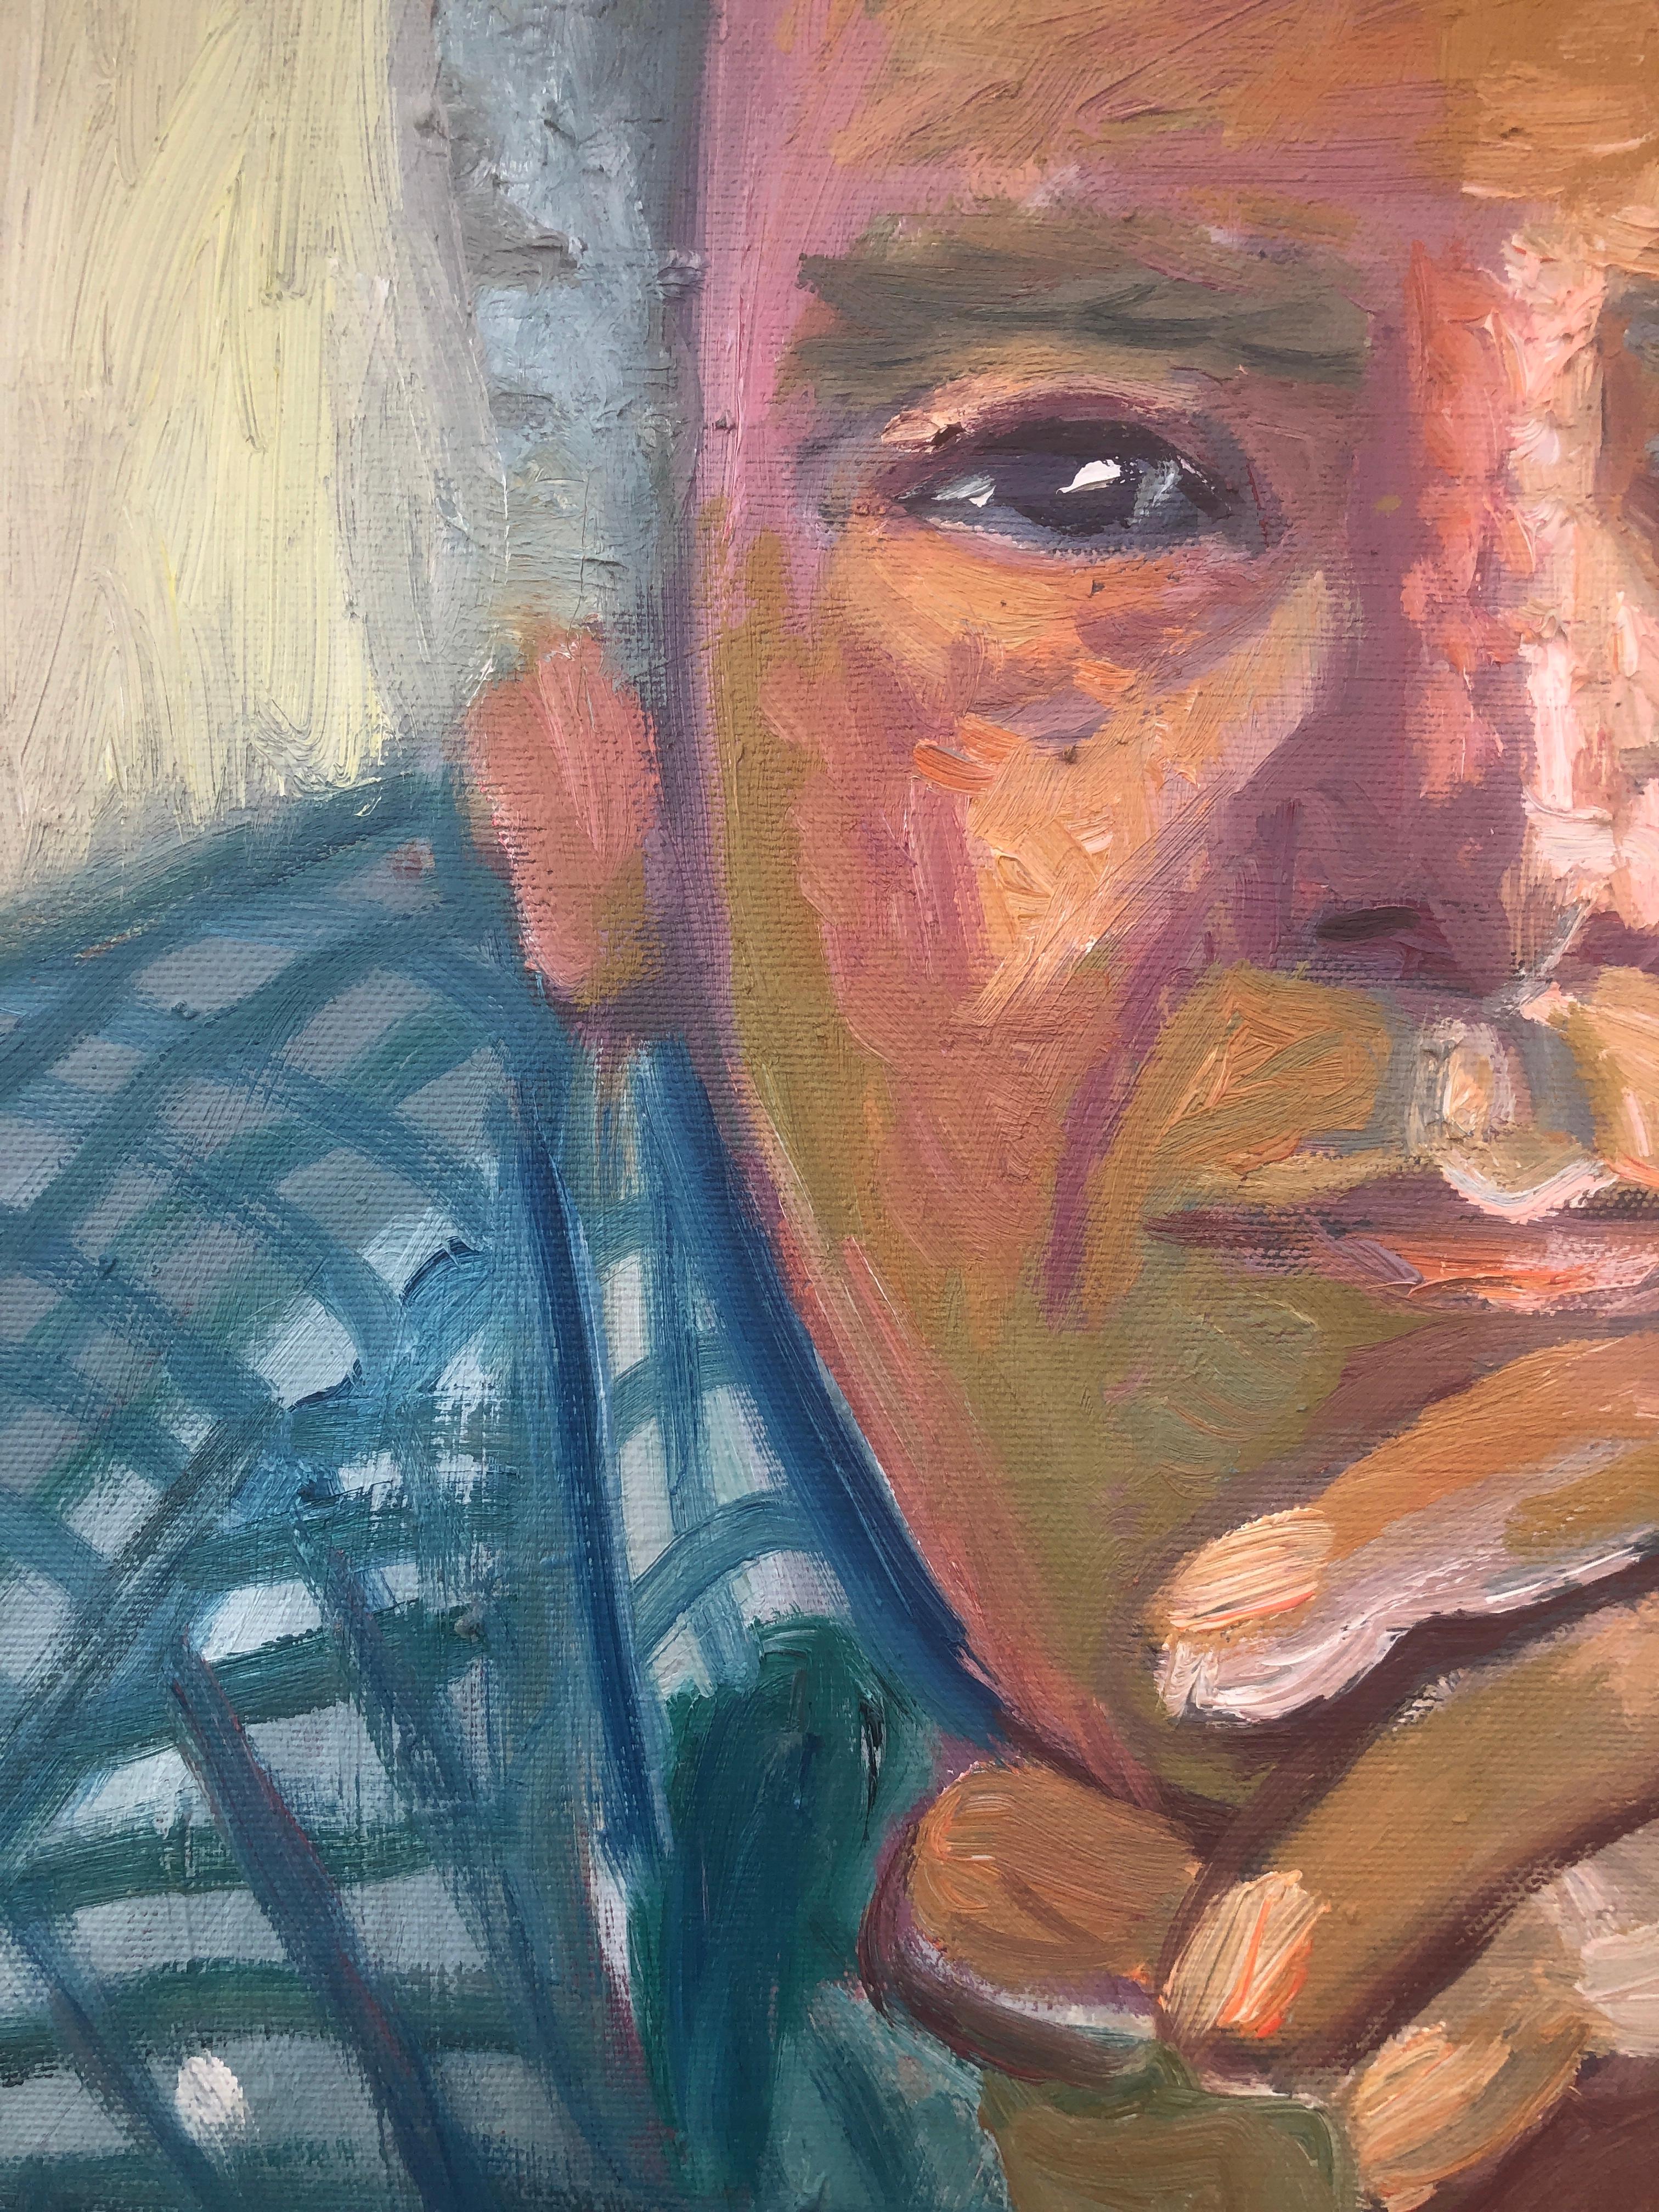 Man portrait oil on canvas painting - Fauvist Painting by Jordi Curos